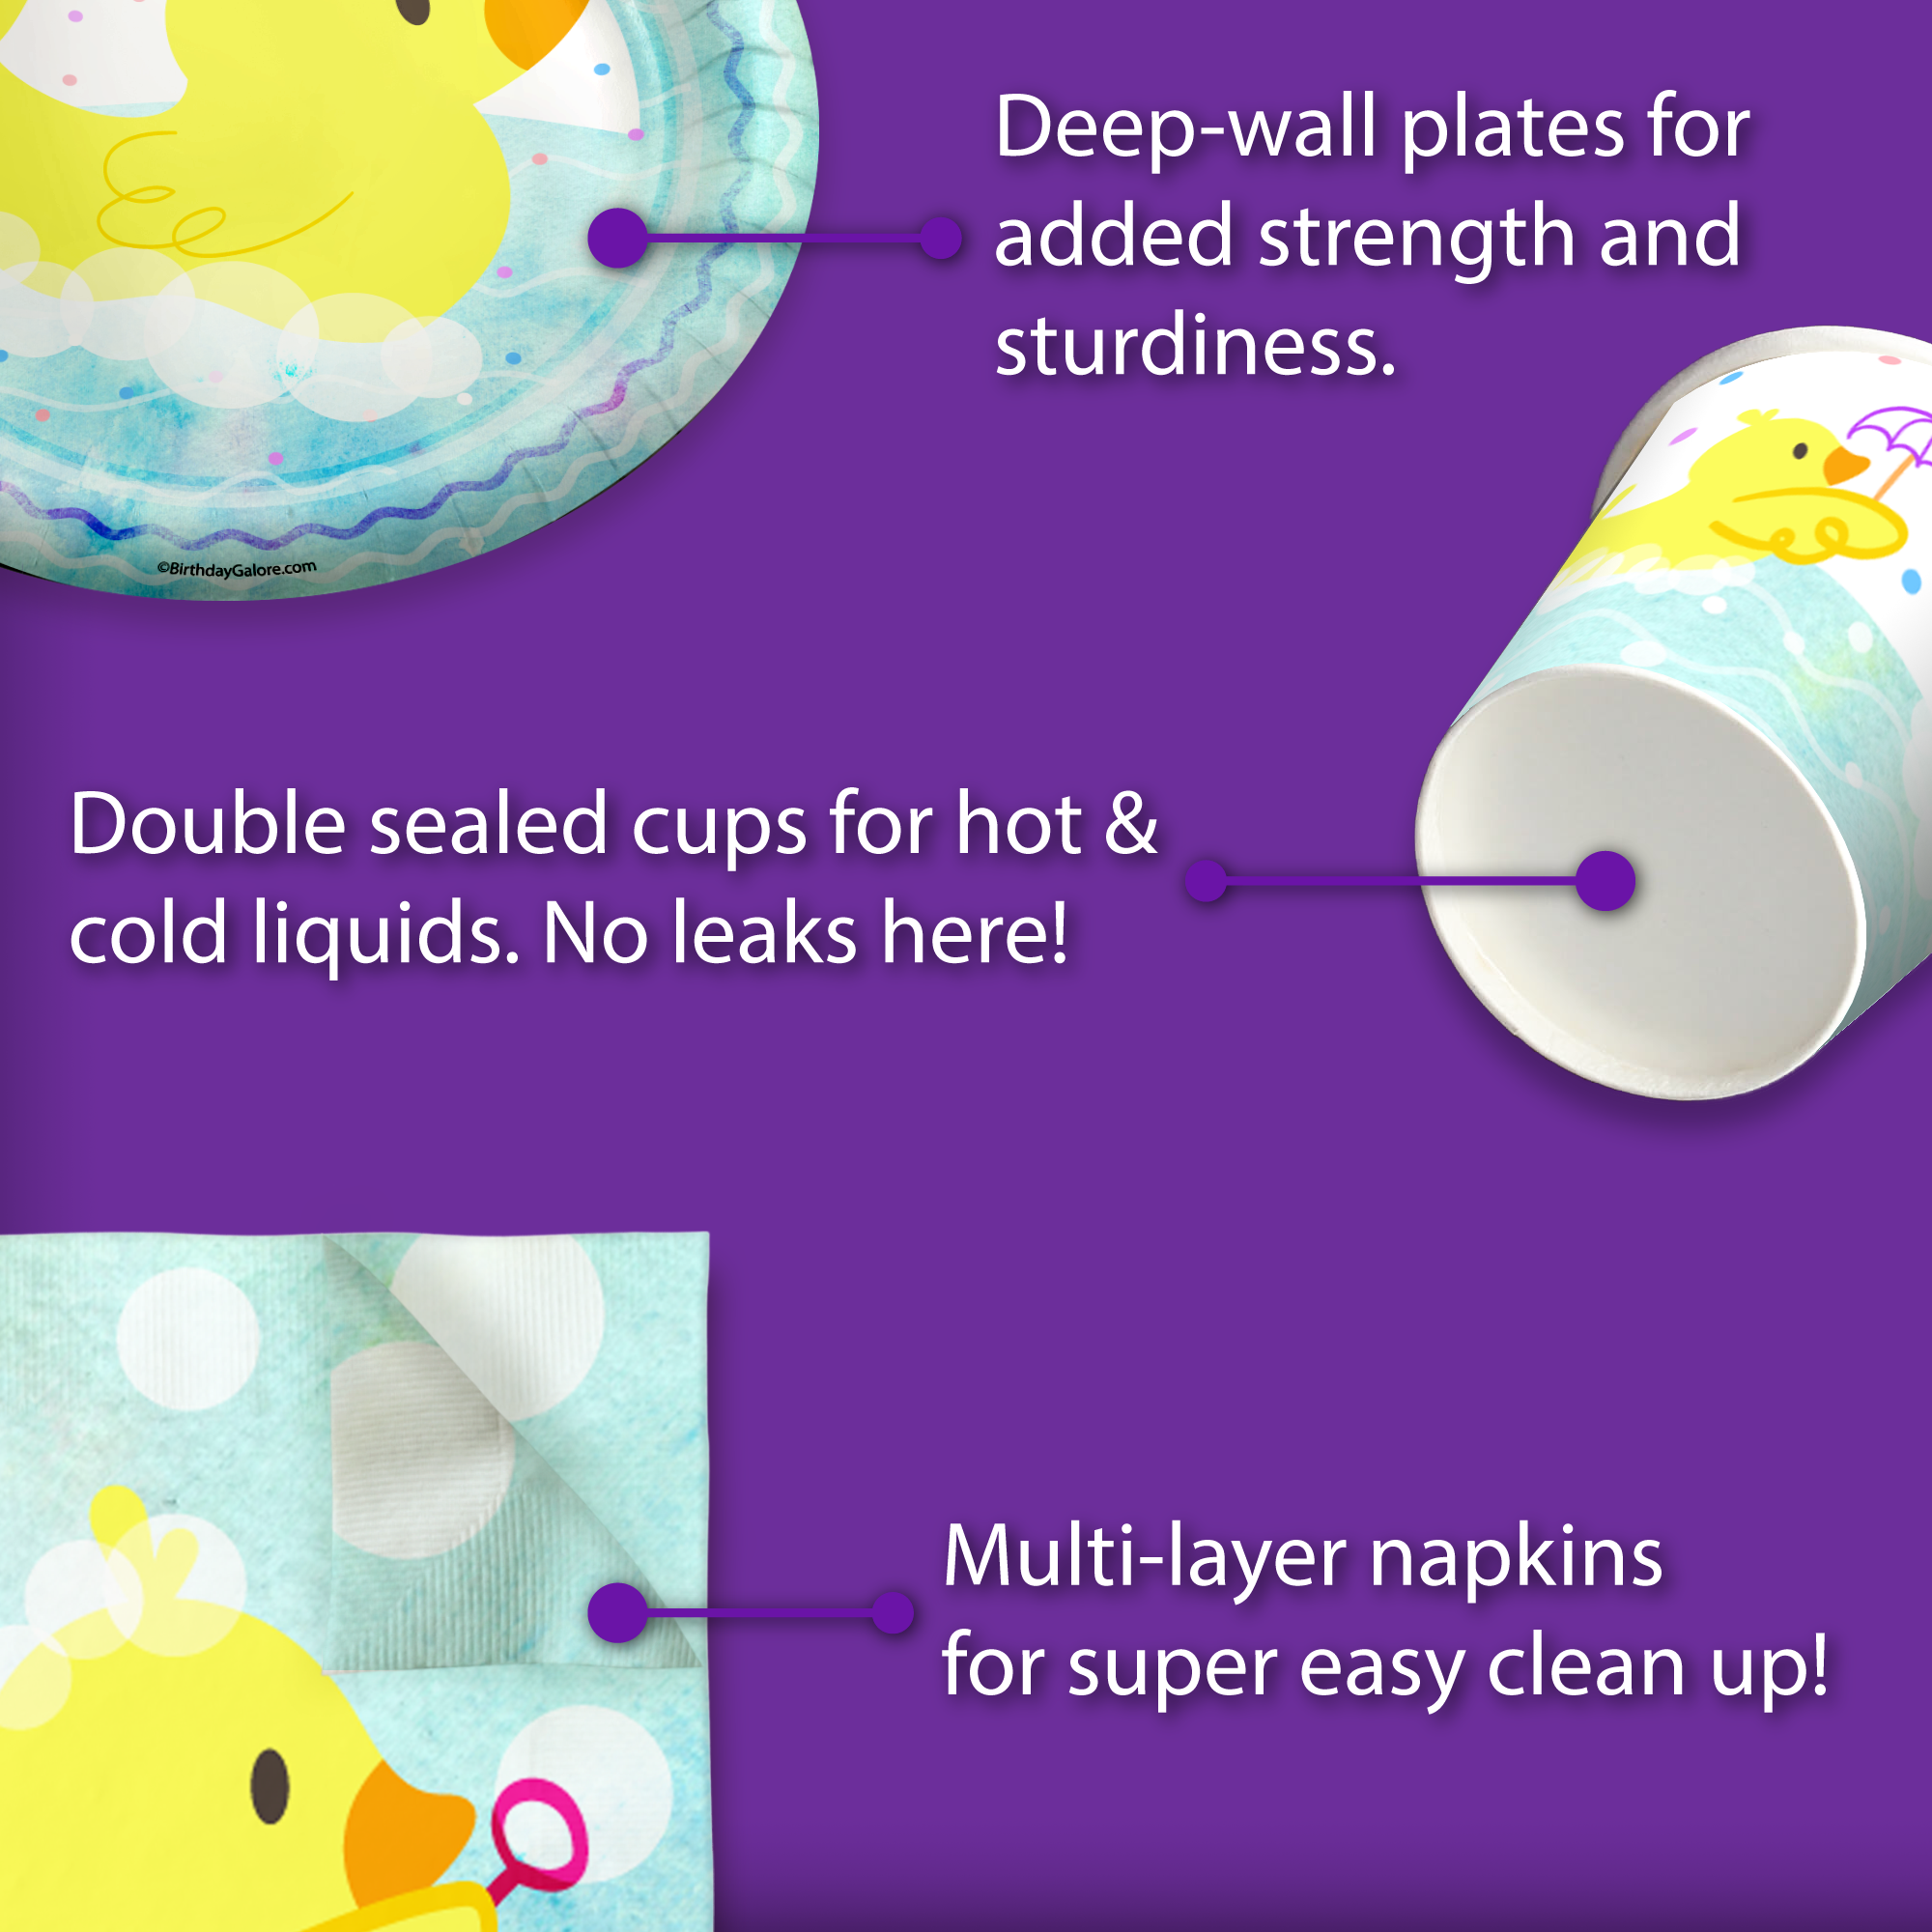 Rubber Ducky Birthday Party Tableware Kit For 16 Guests